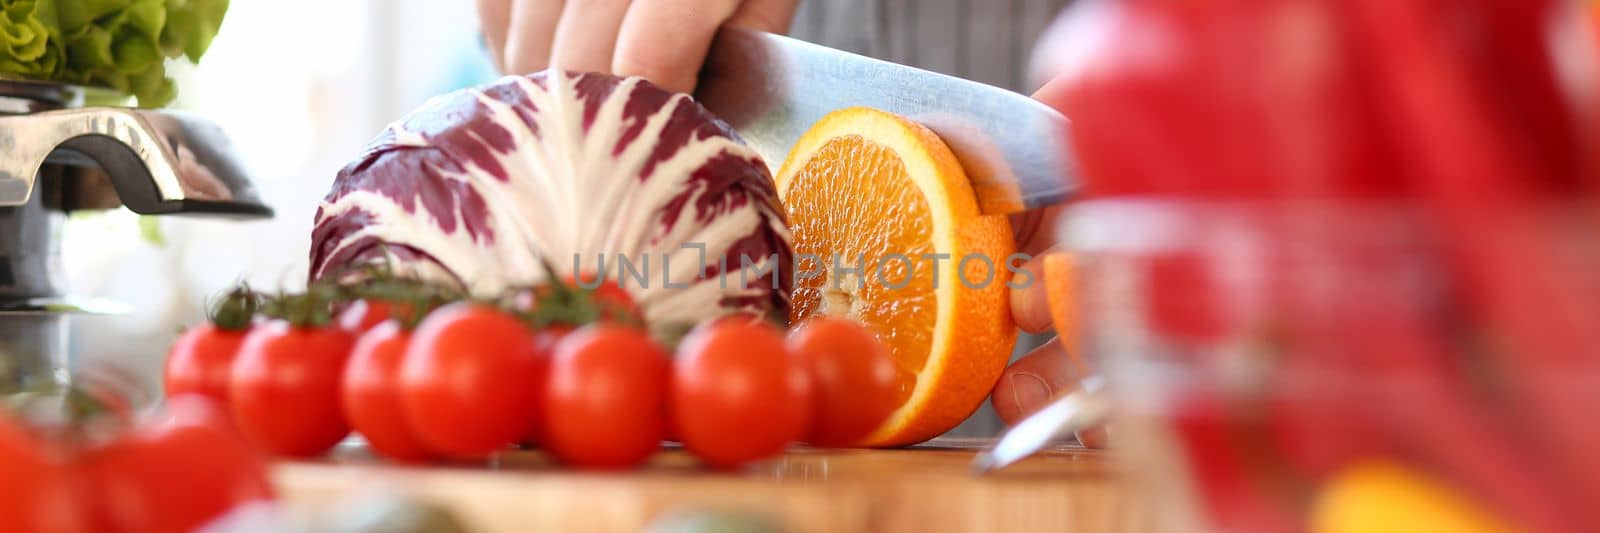 Chef man cut vegetables and fruits on cutting board closeup. Concept of healthy food and vegetarianism